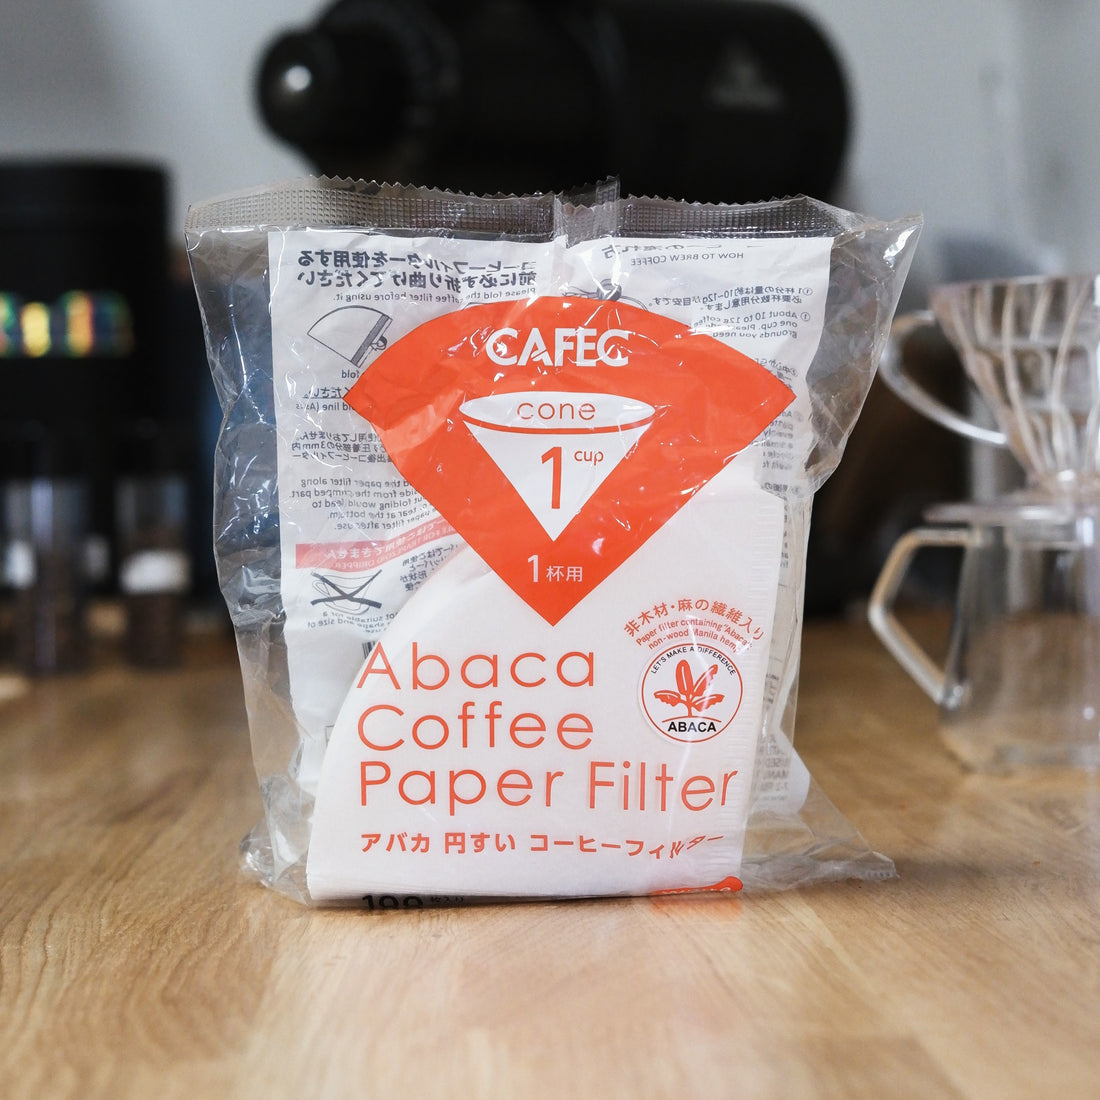 Abaca Coffee Filters